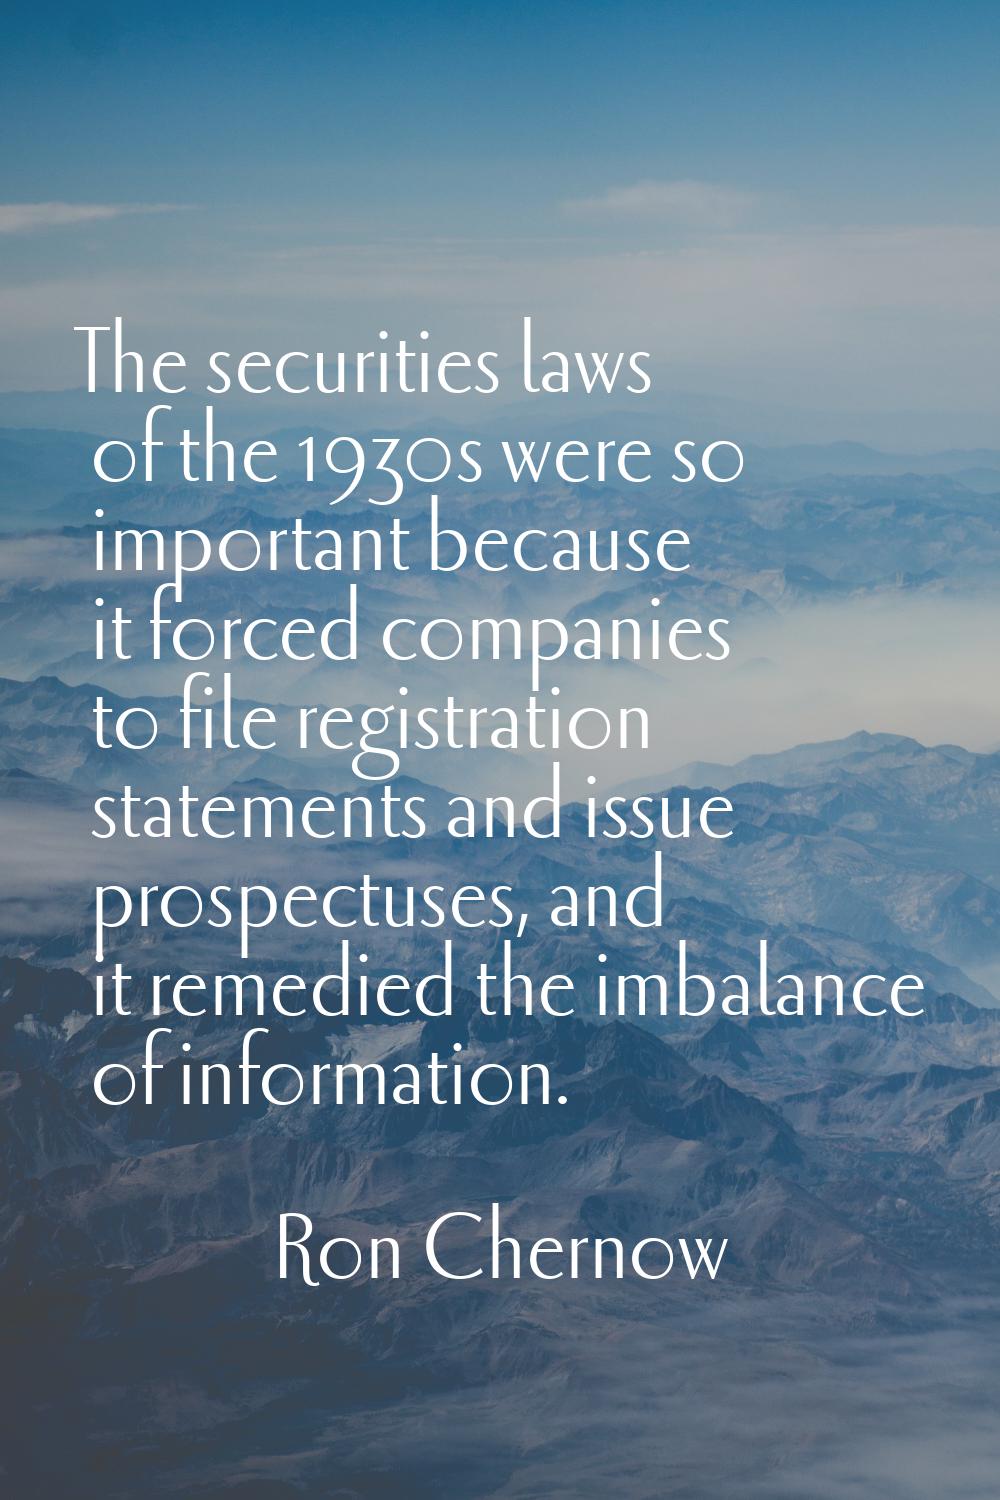 The securities laws of the 1930s were so important because it forced companies to file registration